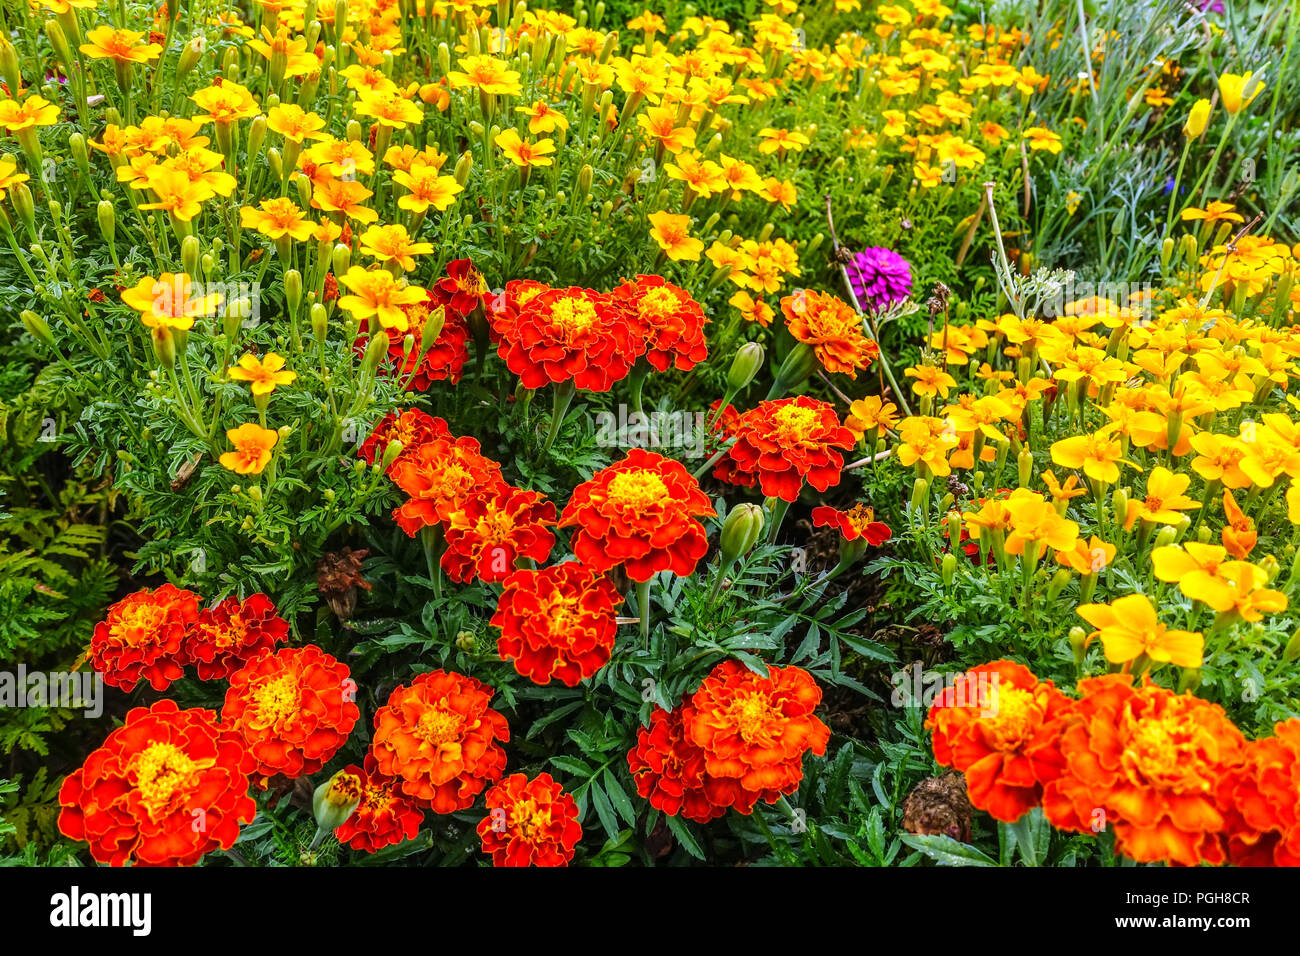 Marigold Red Tagetes patula Yellow Tagetes tenuifolia Mixed Marigolds Border Garden Bedding Plants Mixture Annuals Blooming Flowers Flowering Tagetes Stock Photo